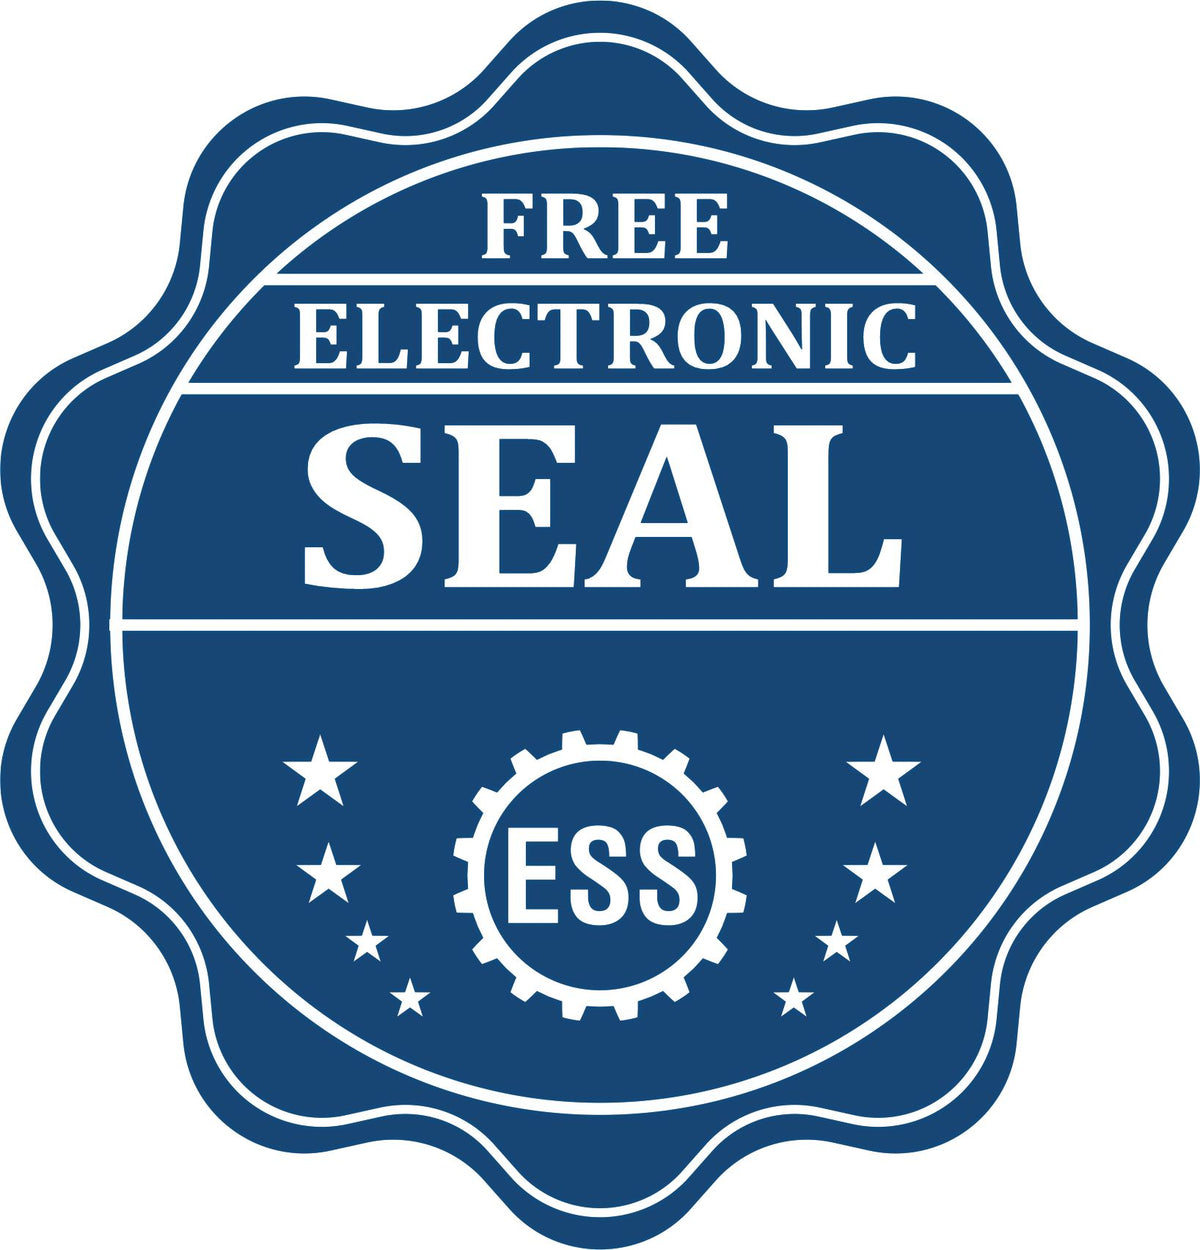 A badge showing a free electronic seal for the Soft Tennessee Professional Geologist Seal with stars and the ESS gear on the emblem.